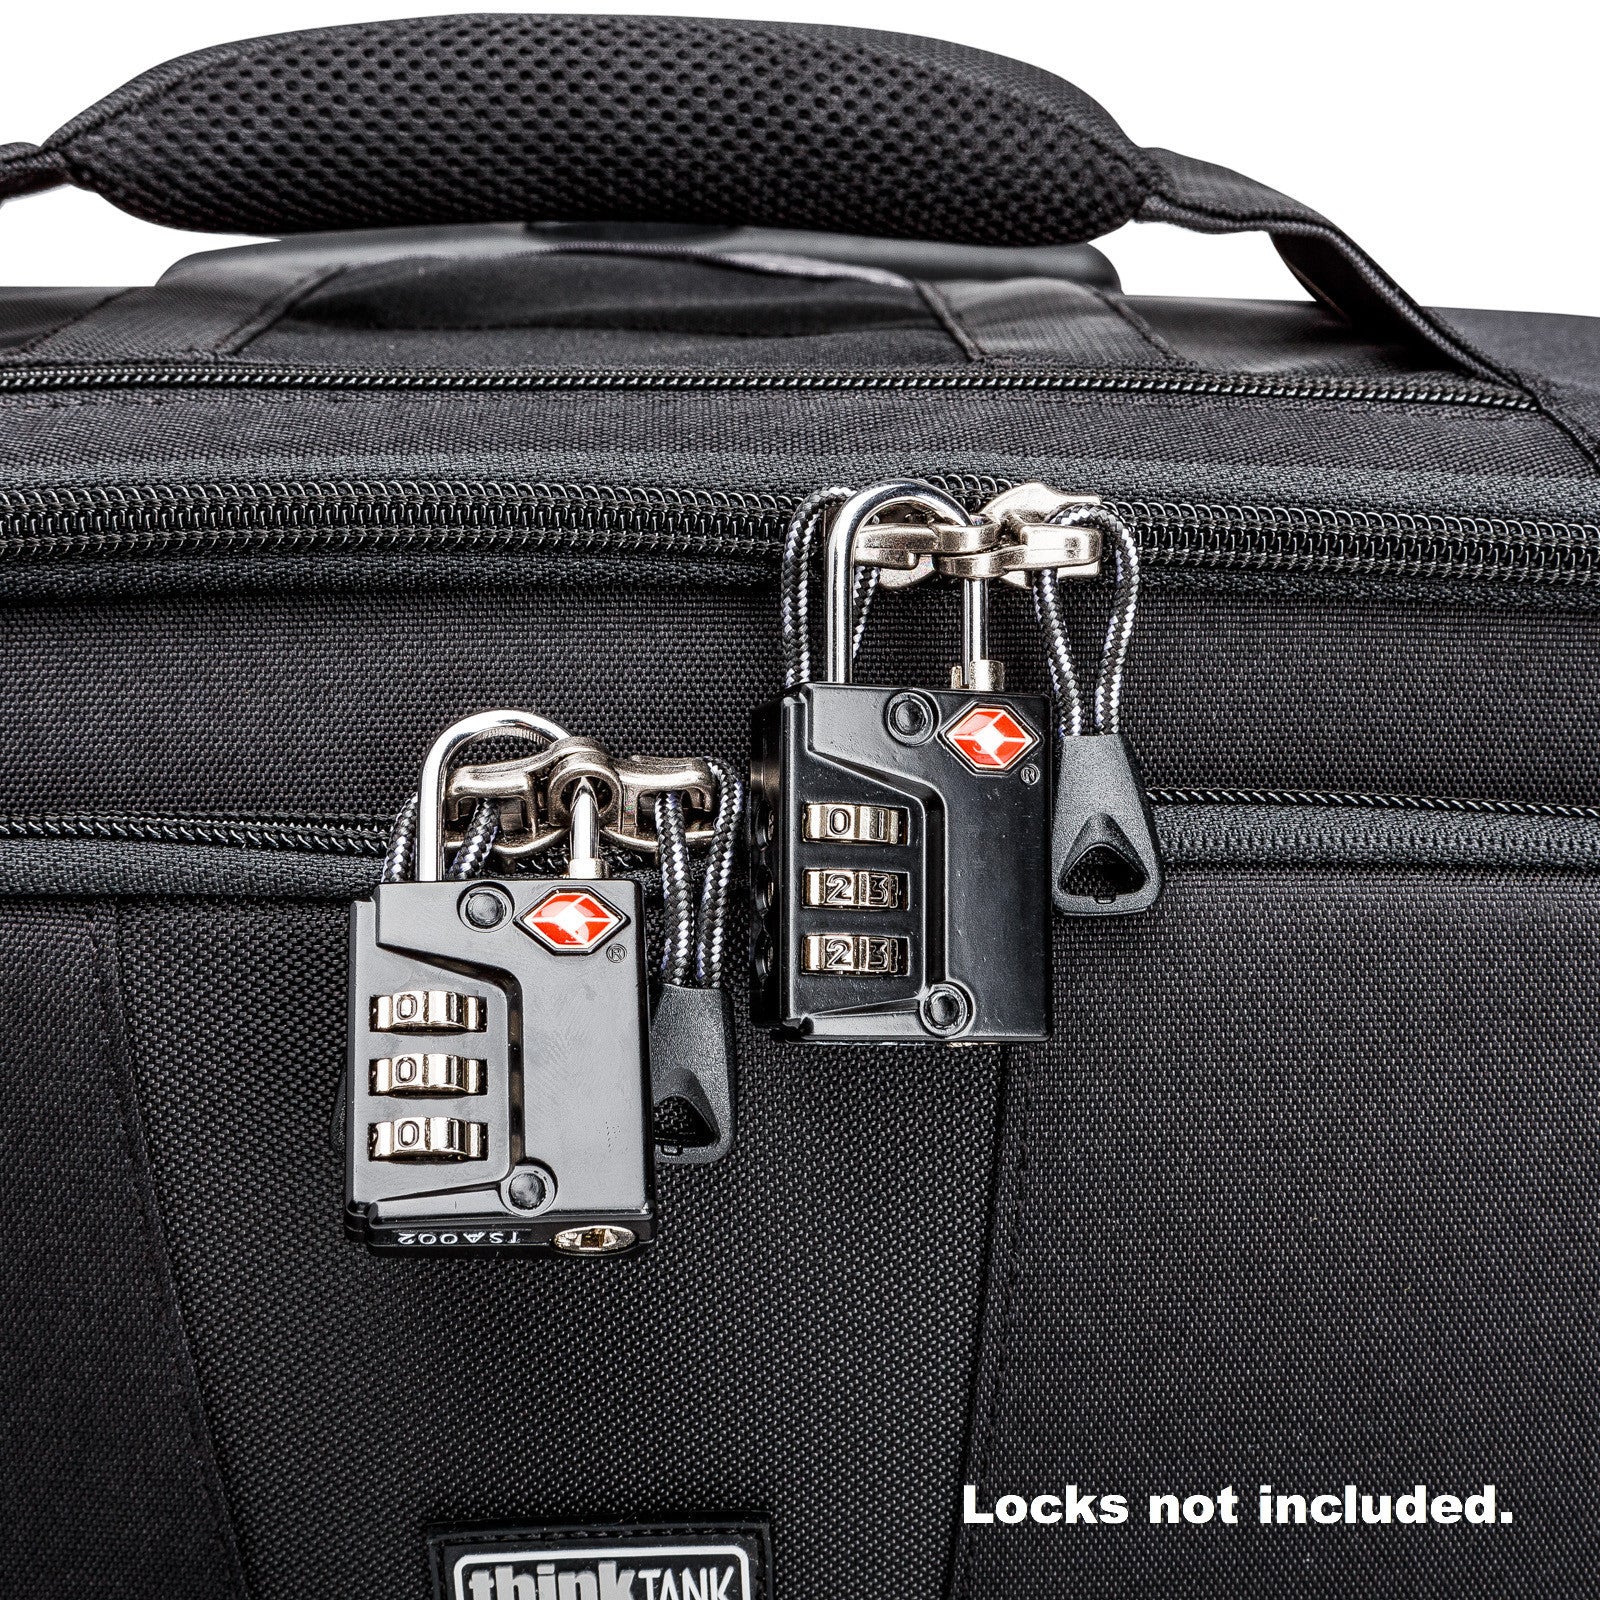 Locking front and top panel zipper sliders. Locks not included.